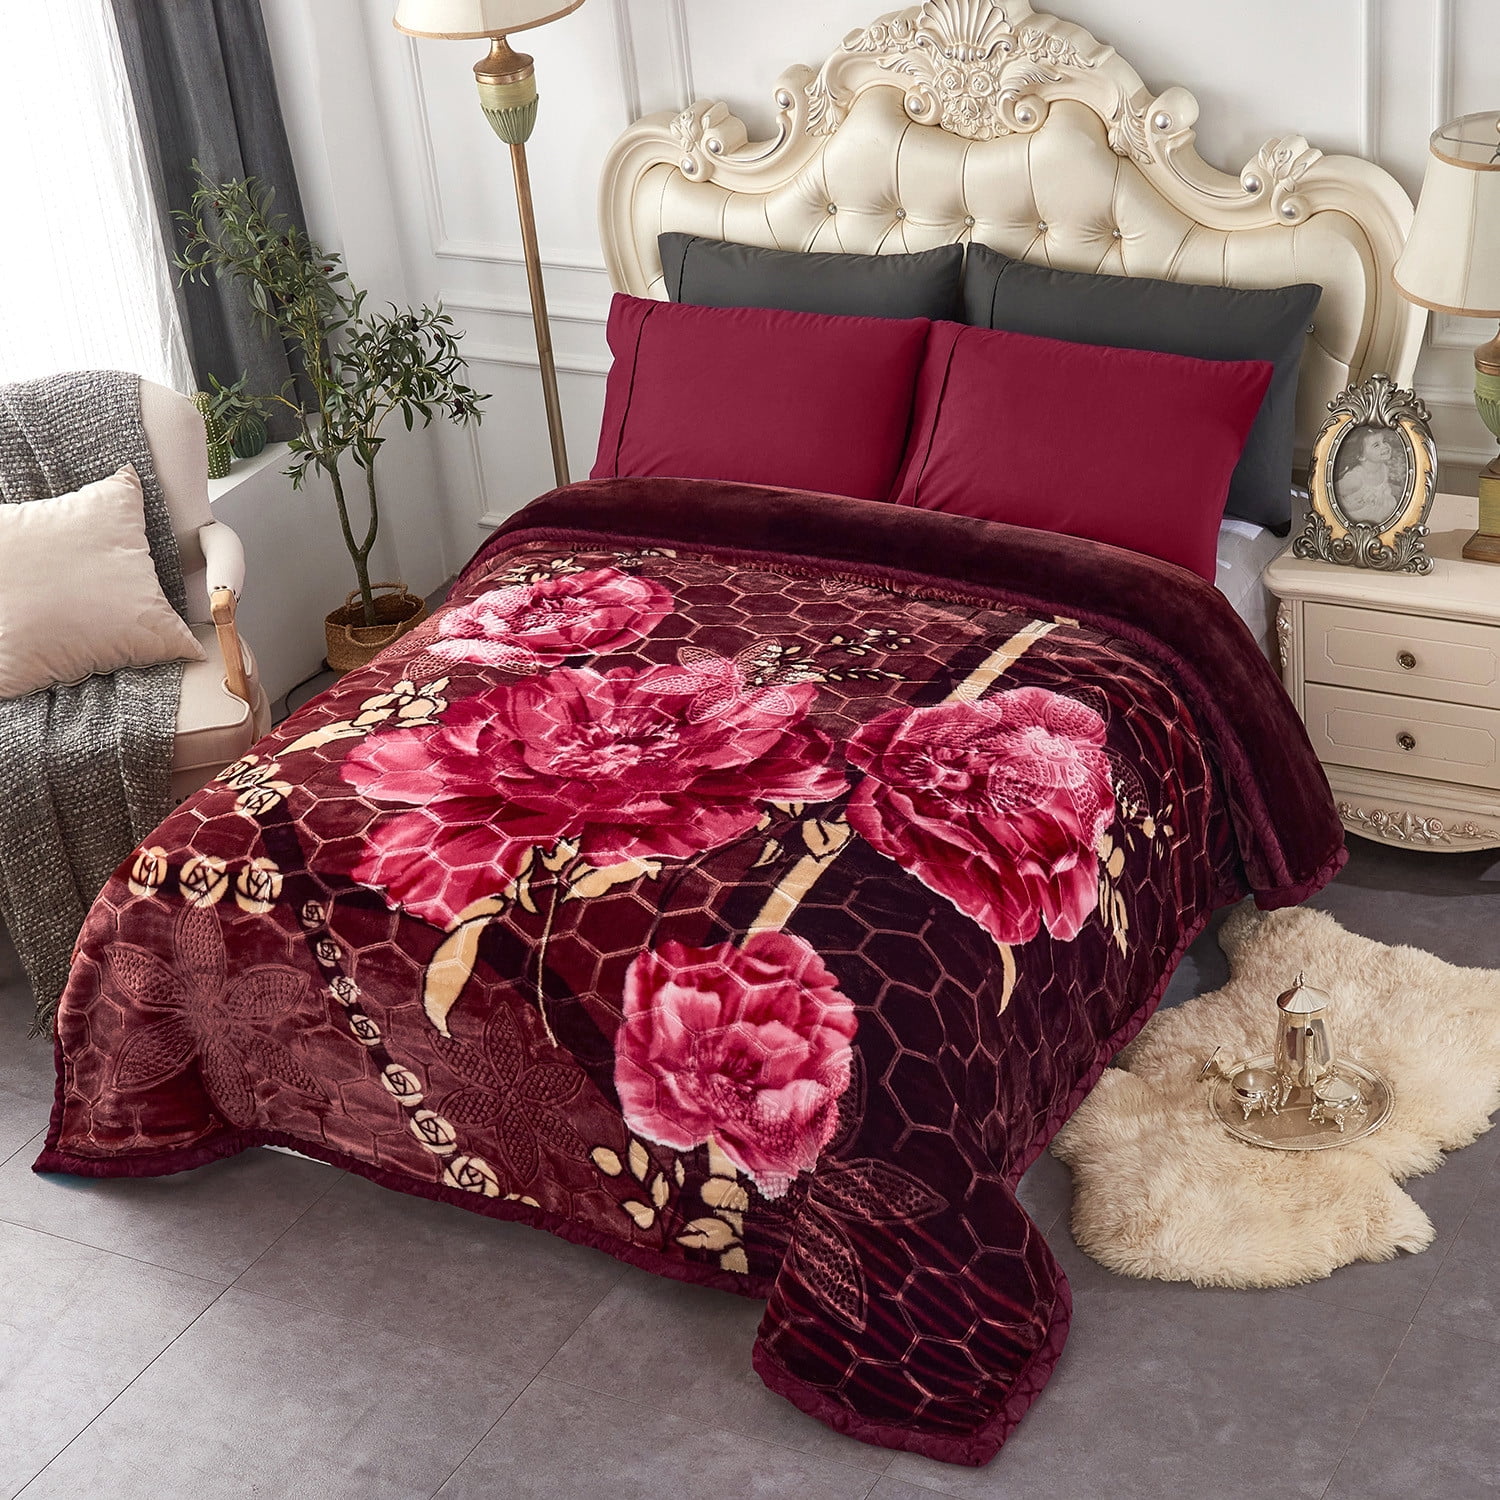 NC King Size Mink Fleece Blanket for Bed,Burgundy Floral 2 Ply Heavy Thick  Warm Blanket 10lbs,85x95 